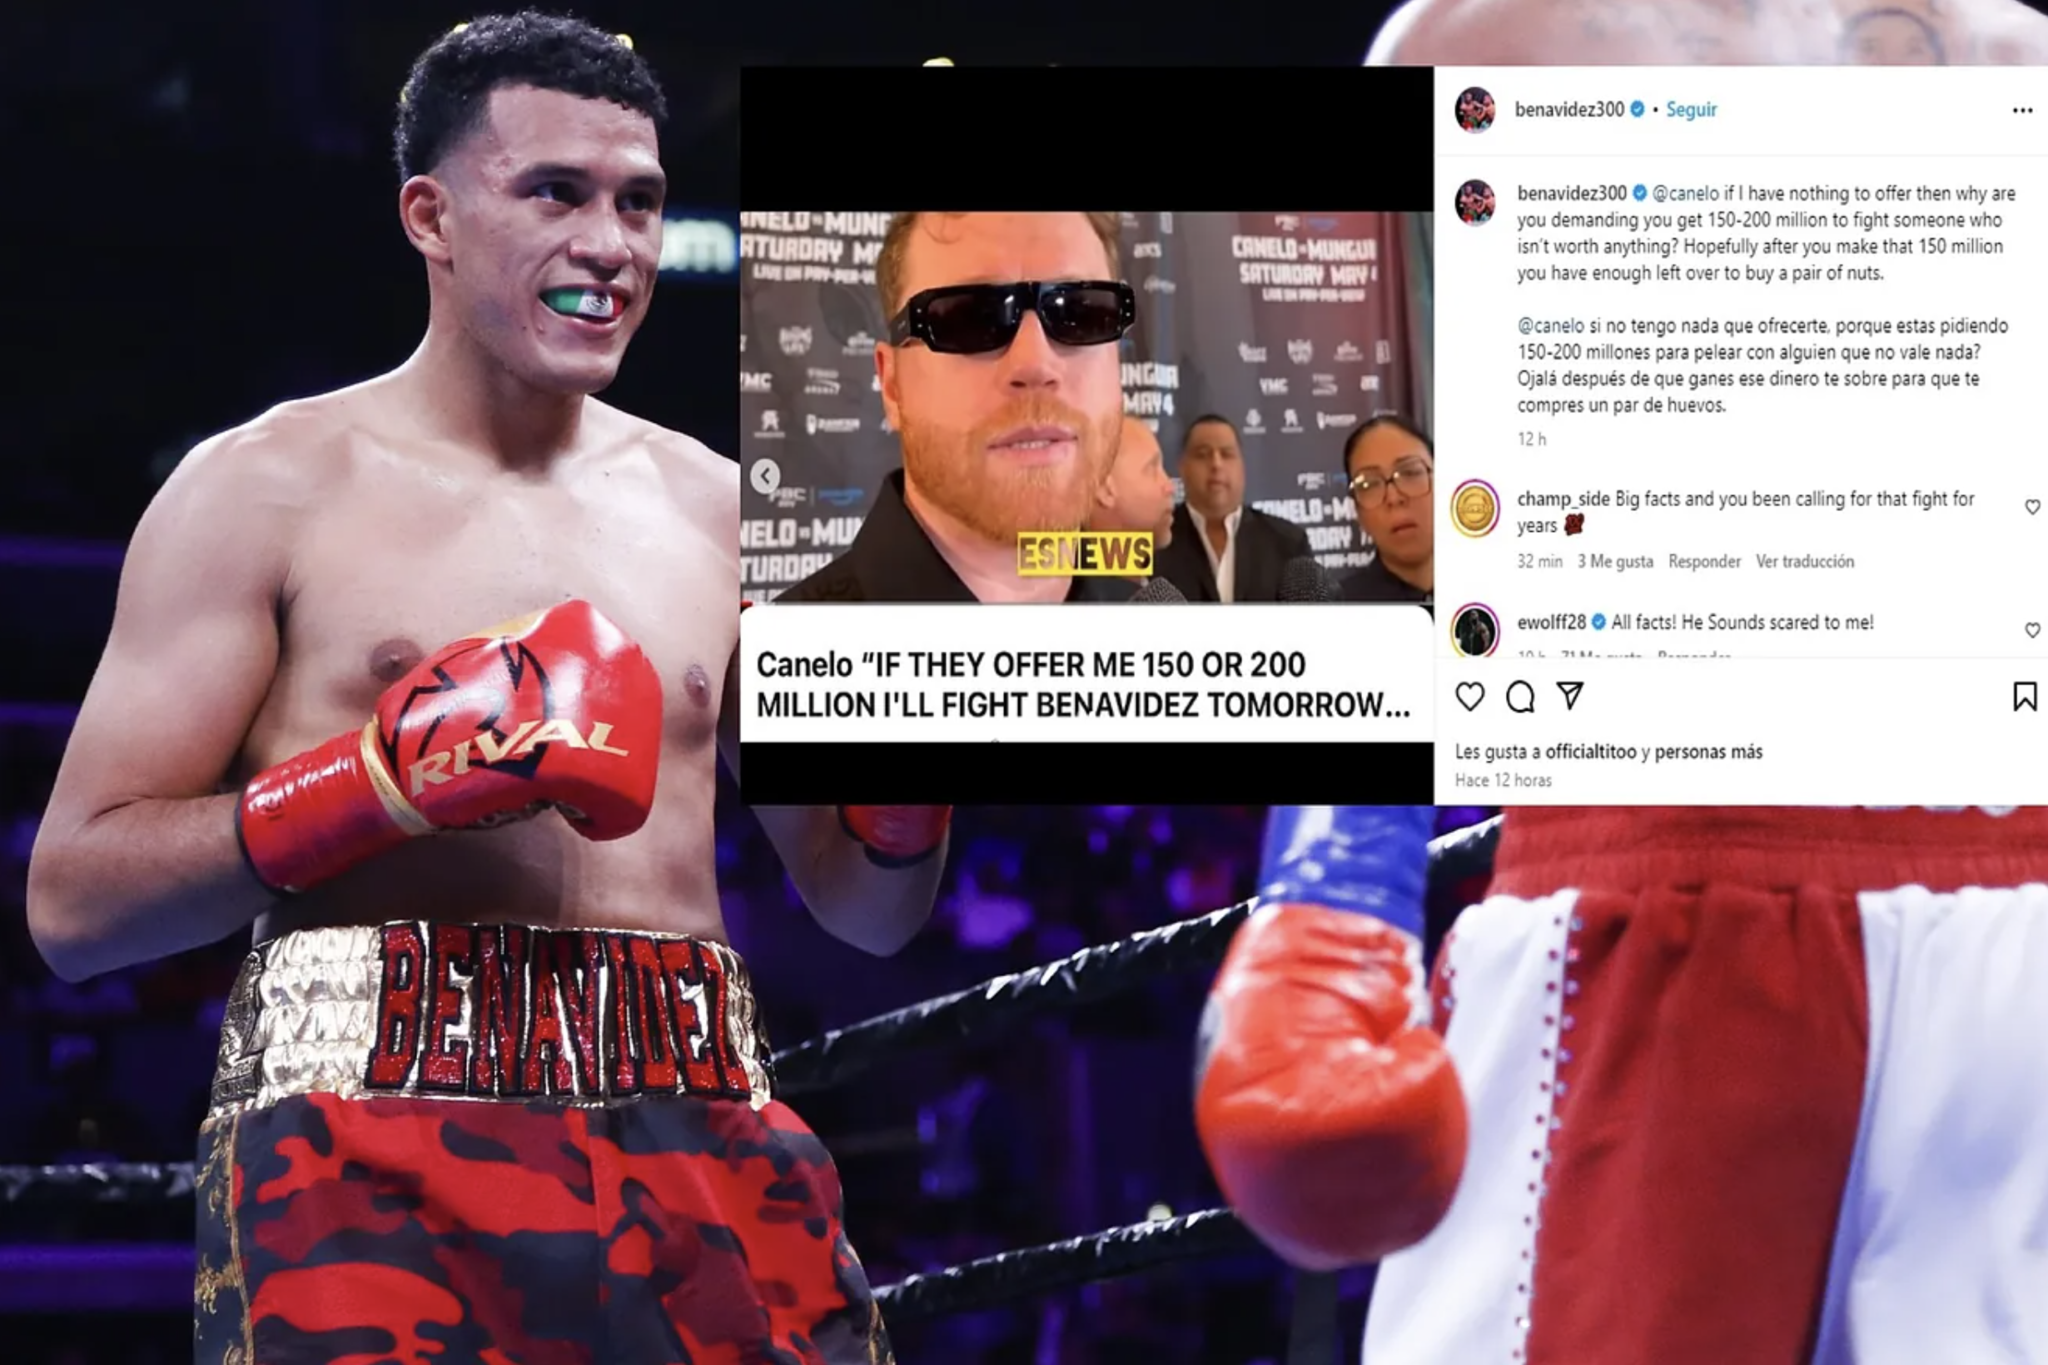 David Benavidez blasts Canelo after asking for 200 million dollars: So you can buy yourself a pair of balls...